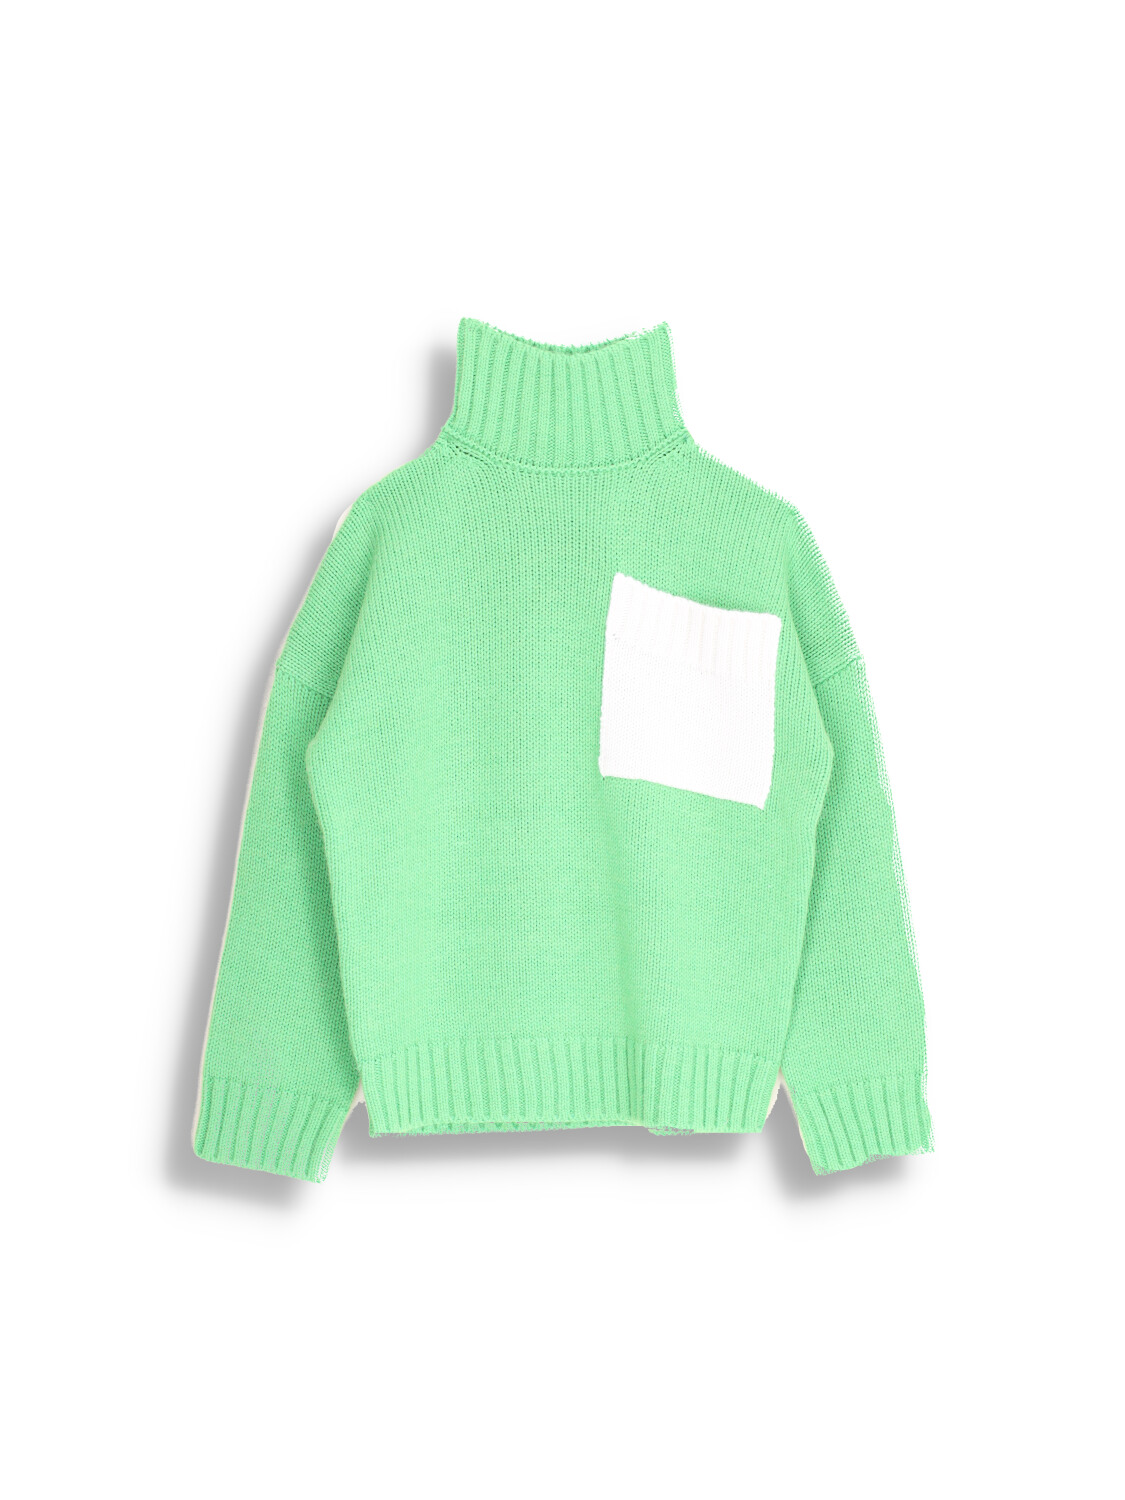 Knitted Patch- Pocket Jumper - knitted sweater with alpaca